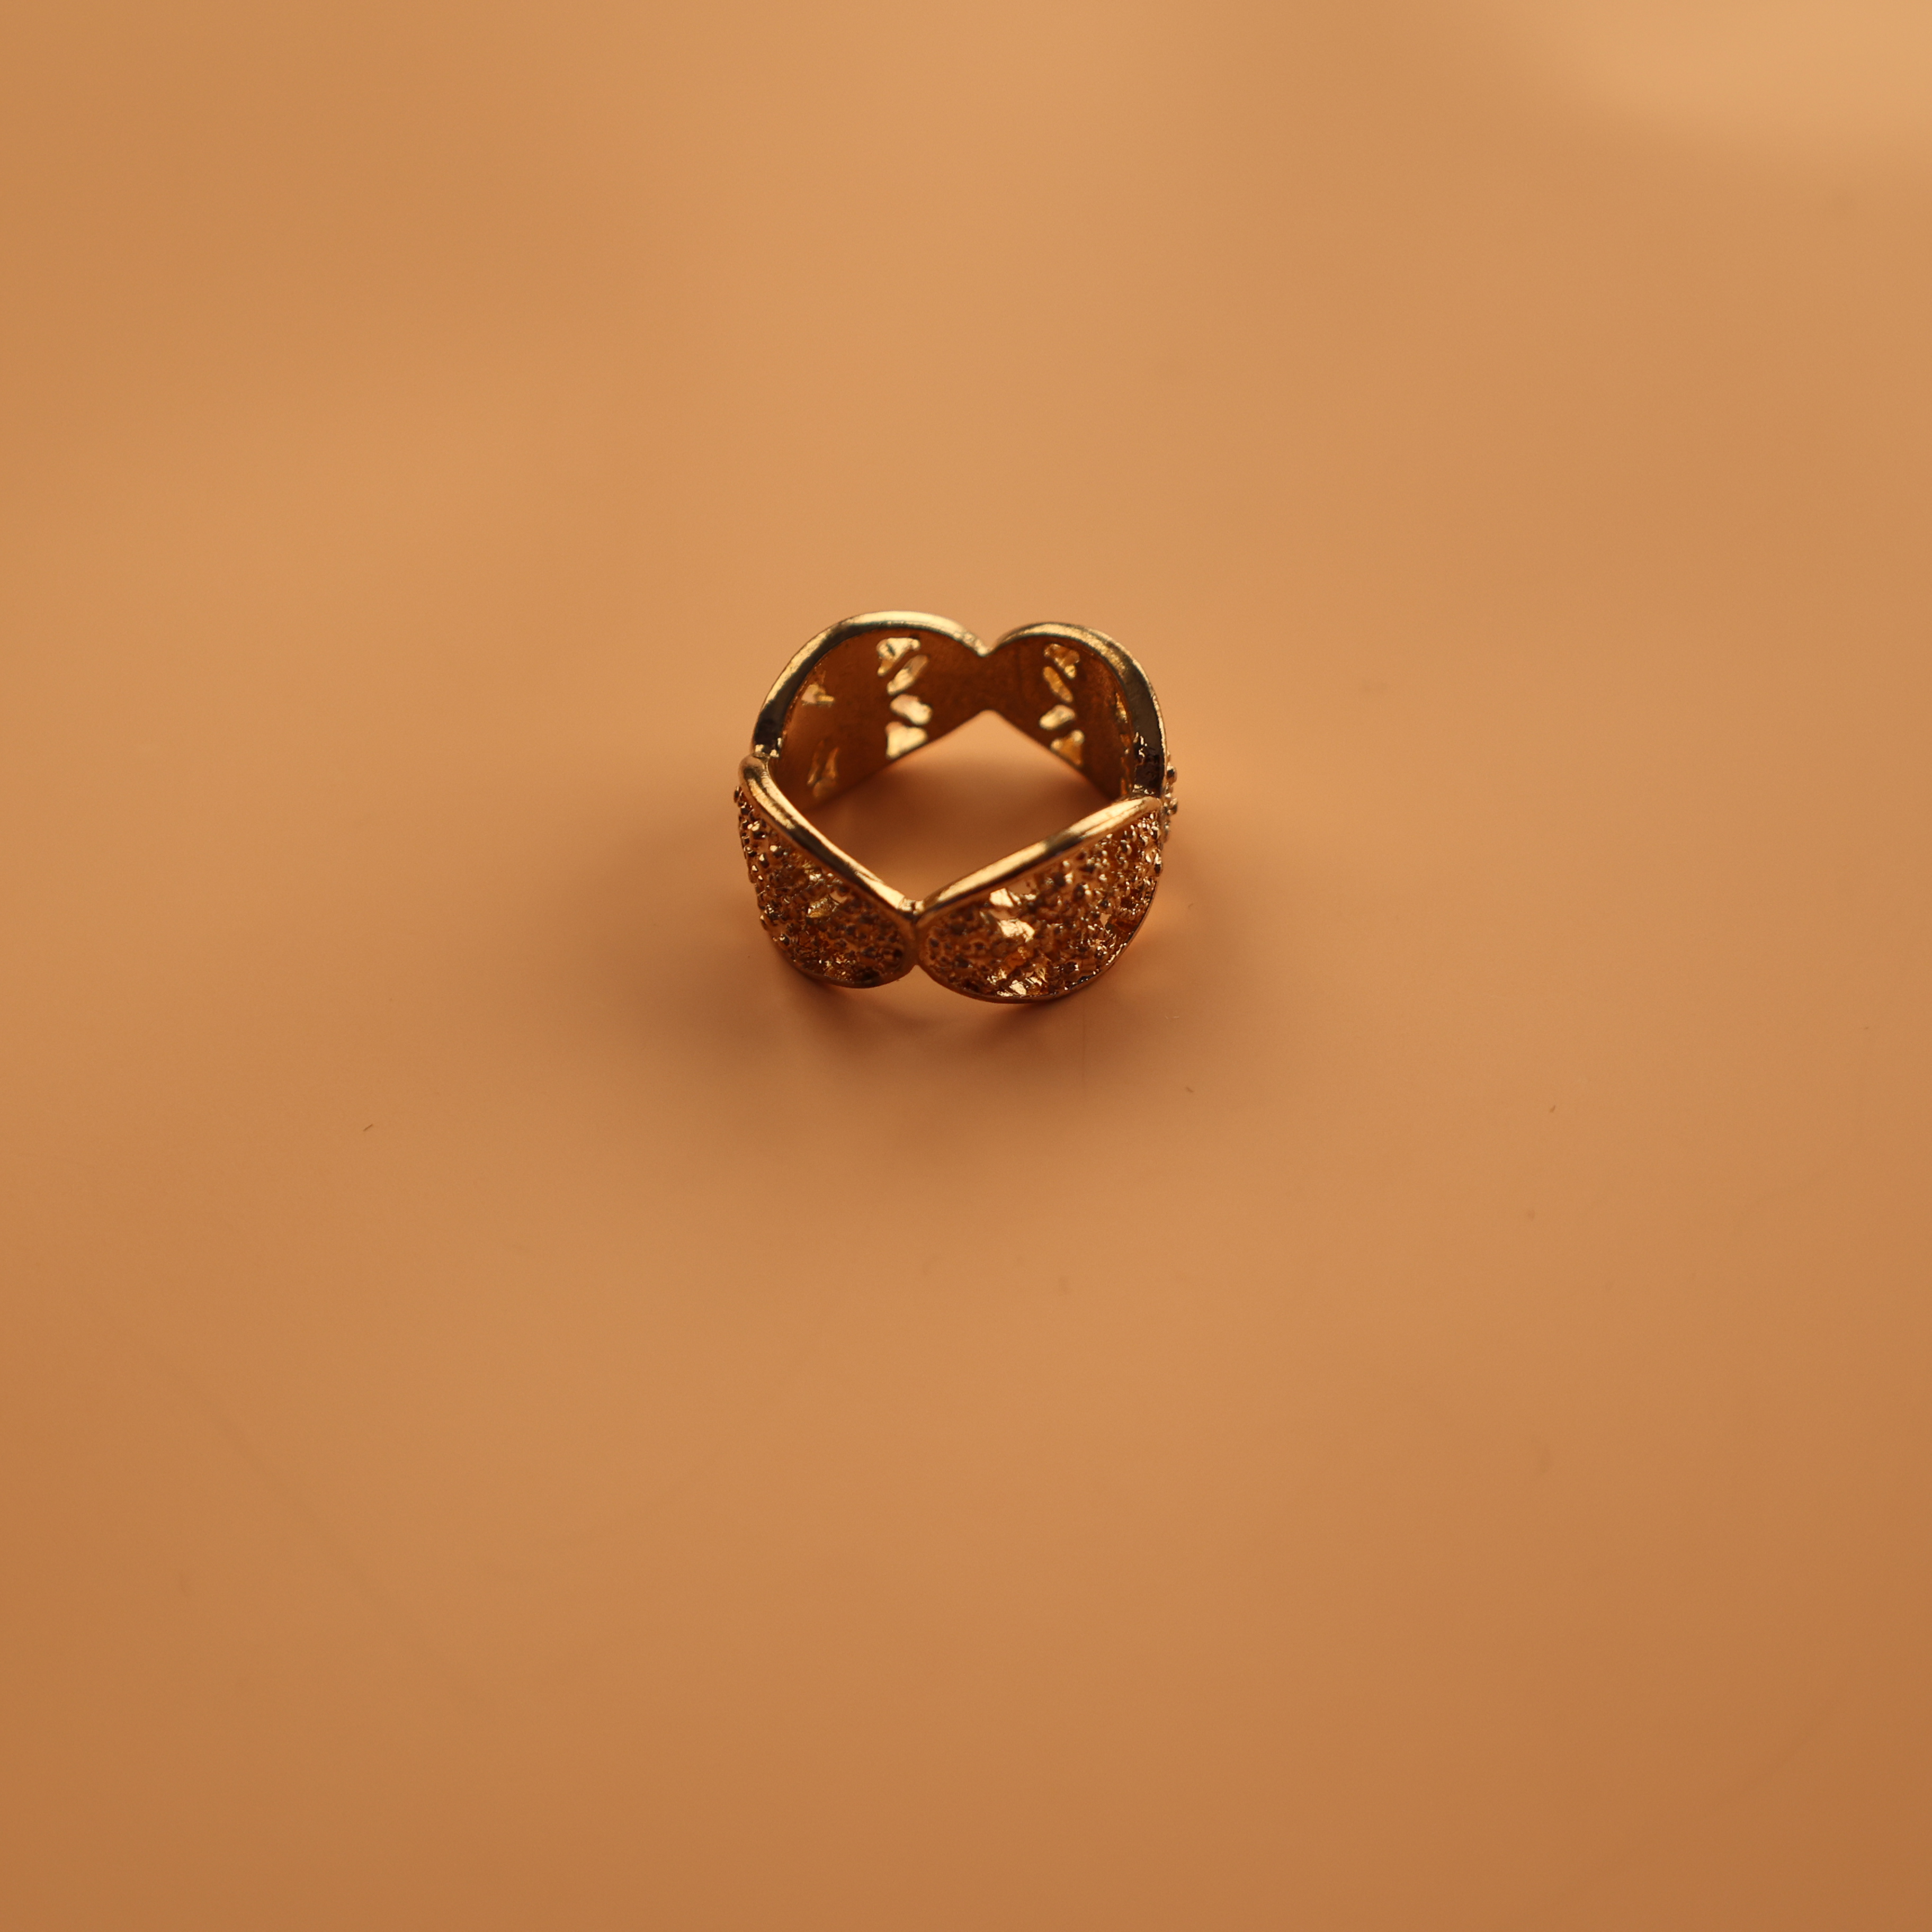 Lion Design Fashion Jewelry Ring Made of Brass Gold Plated